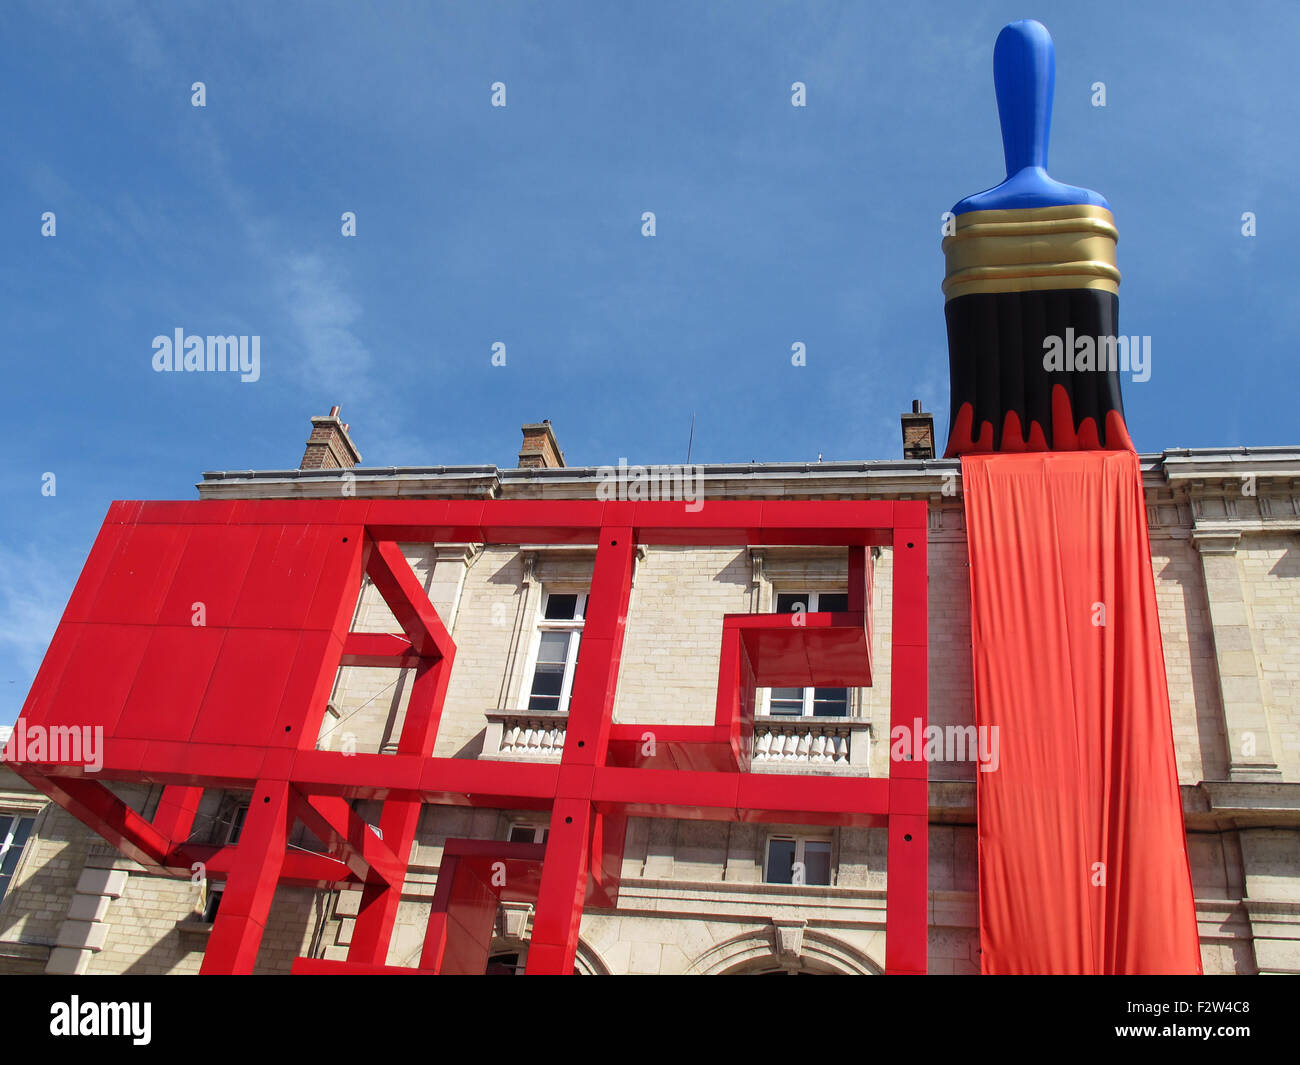 Paint The Town Red-2013 by Filthy Luker-Pedro Estrellas/Desing In Air,Great Britain,L'Air des Geants,The Giants Air,exhibition Stock Photo